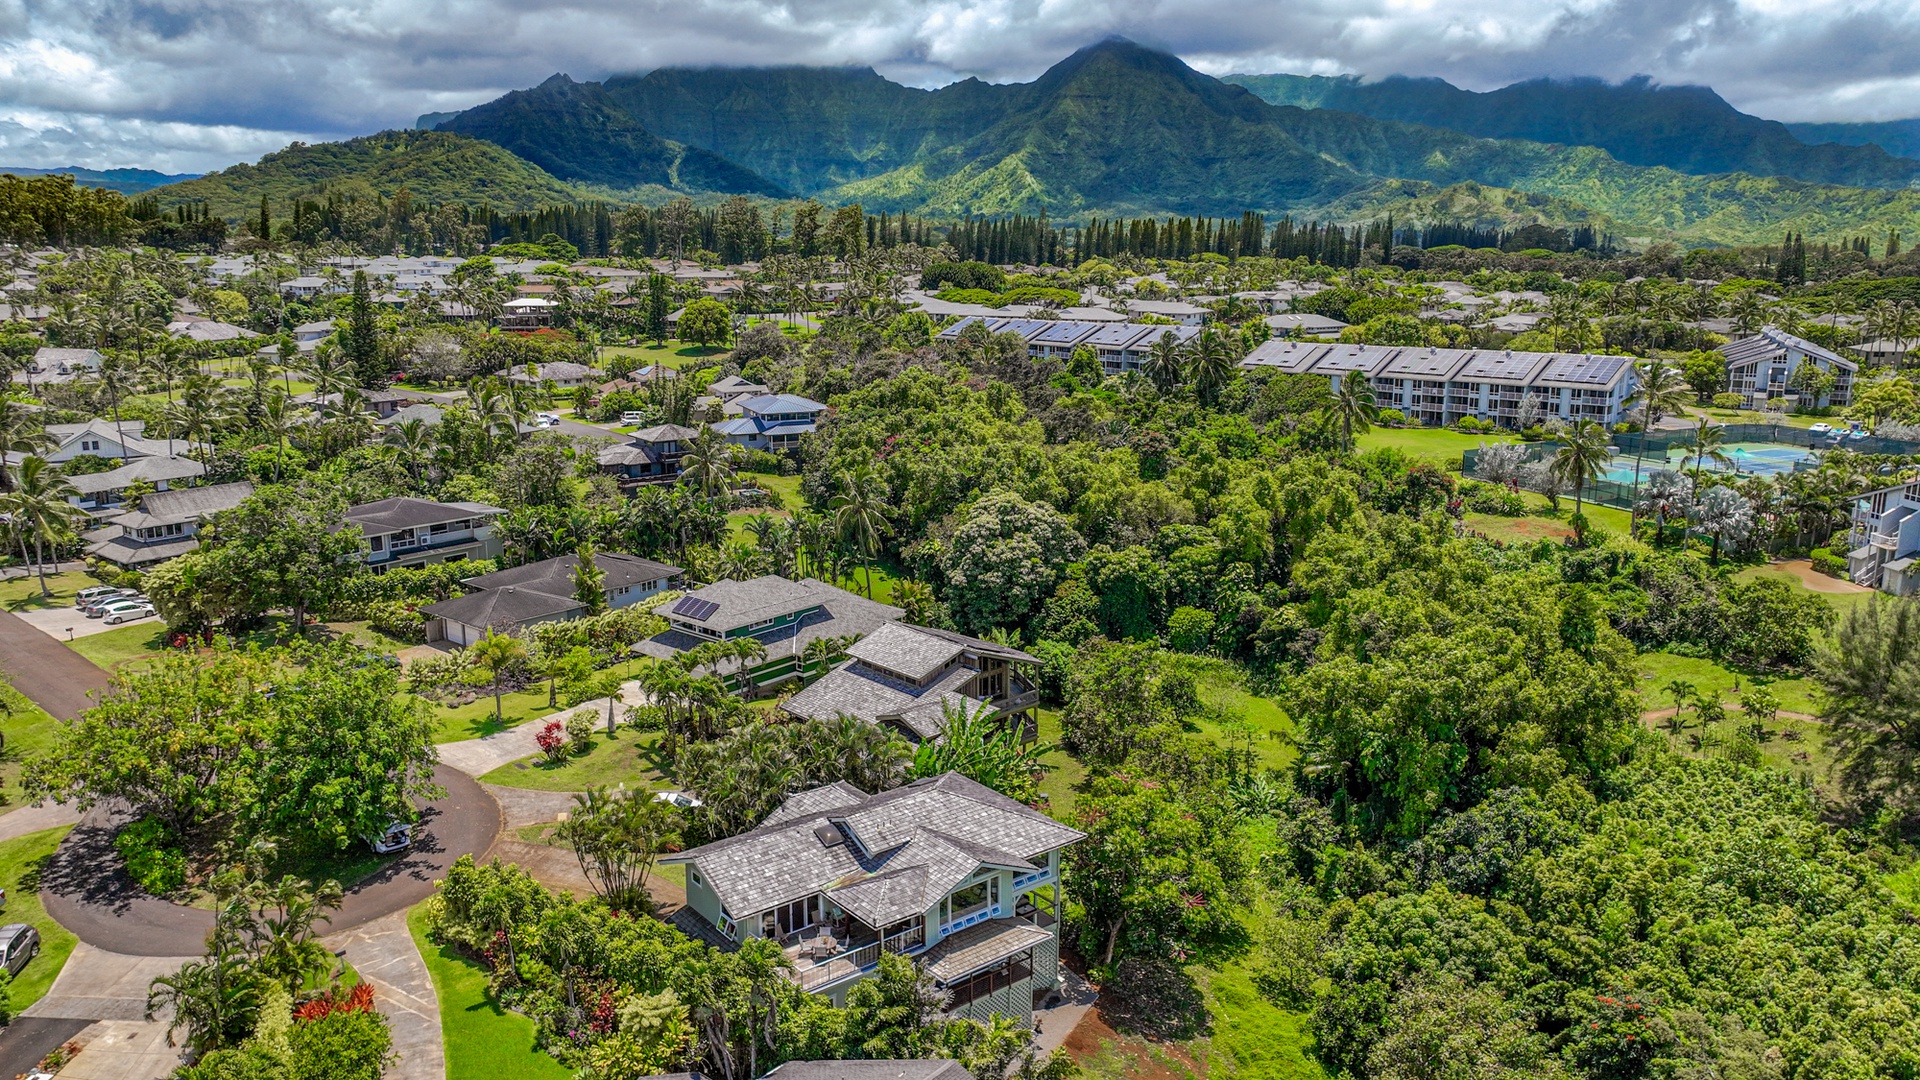 Princeville Vacation Rentals, Wai Lani - The distant mountains provide a majestic backdrop to the home.